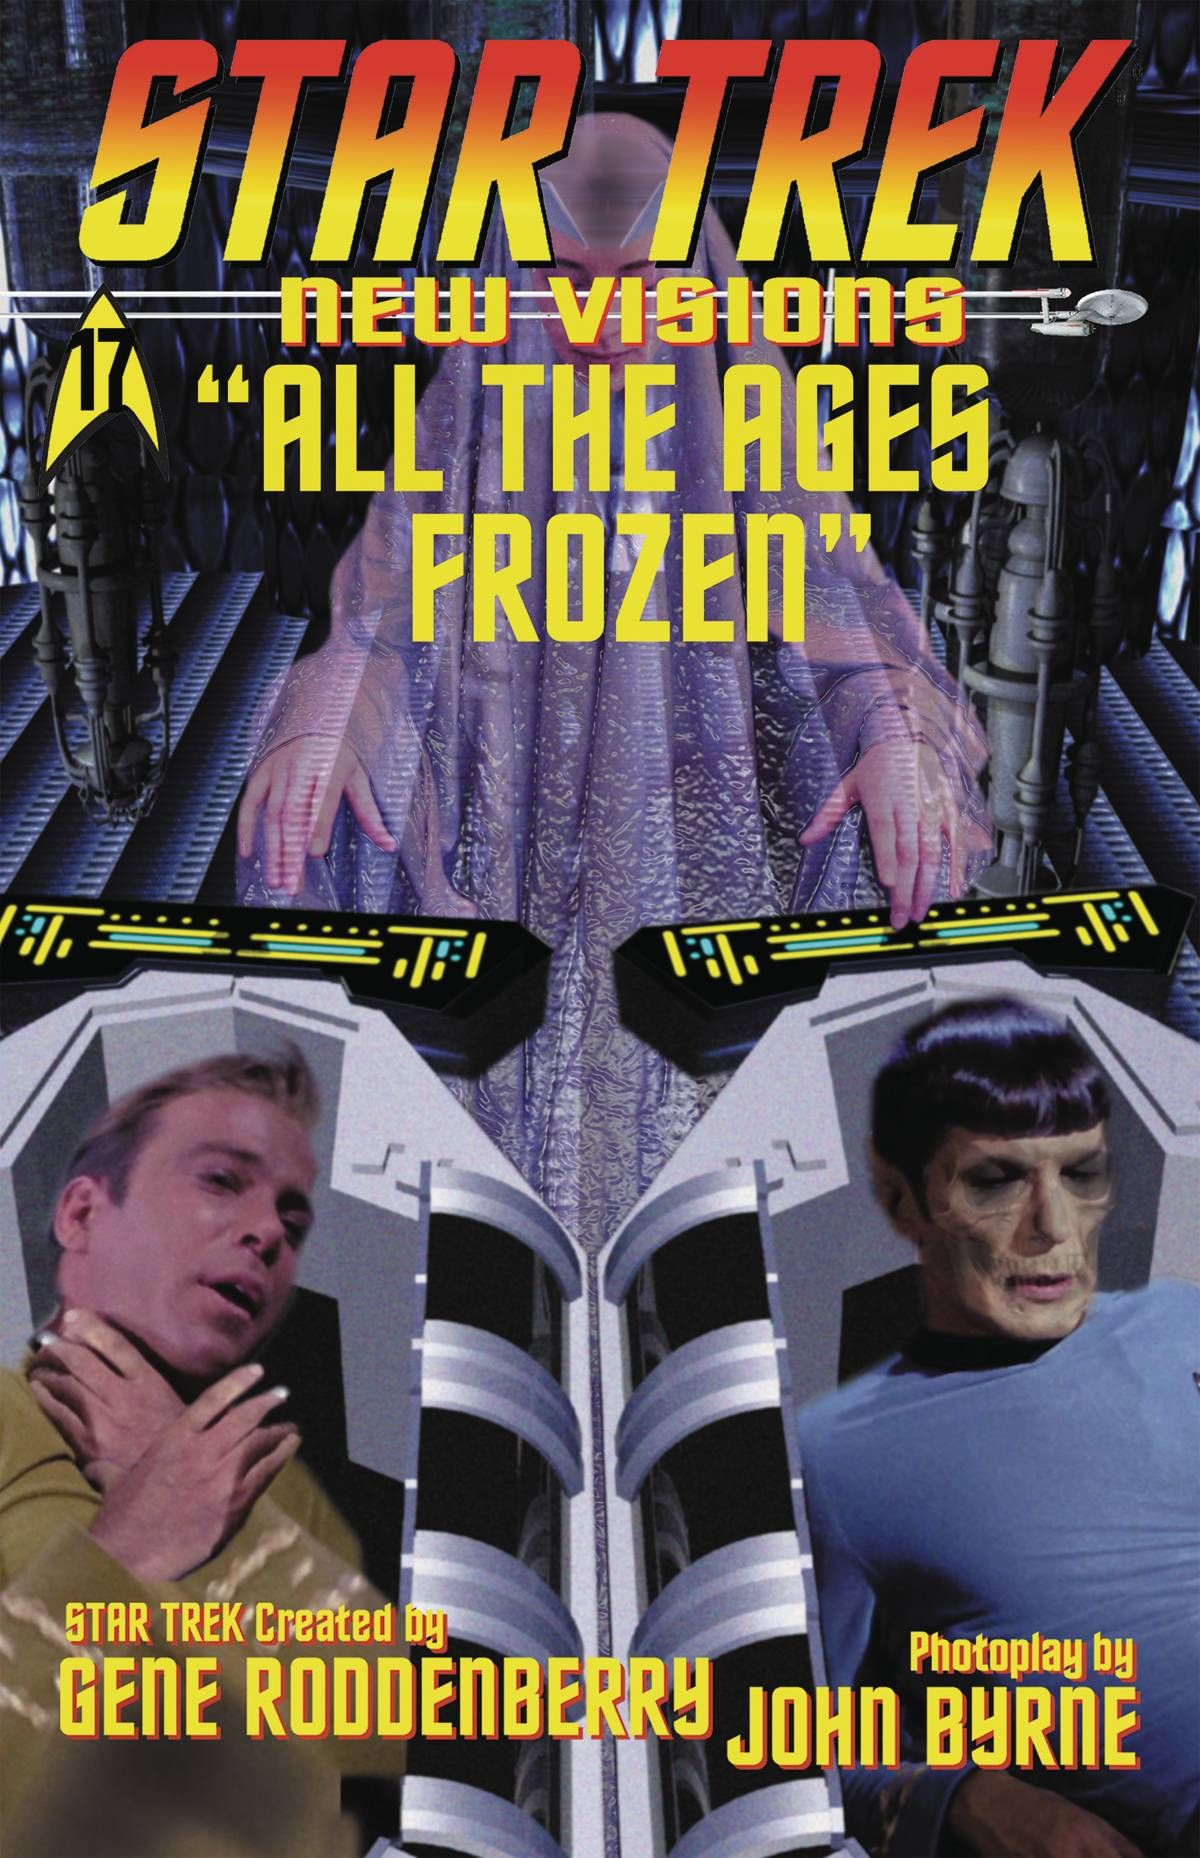 Star Trek: New Visions #17 (All The Ages Frozen) Comic